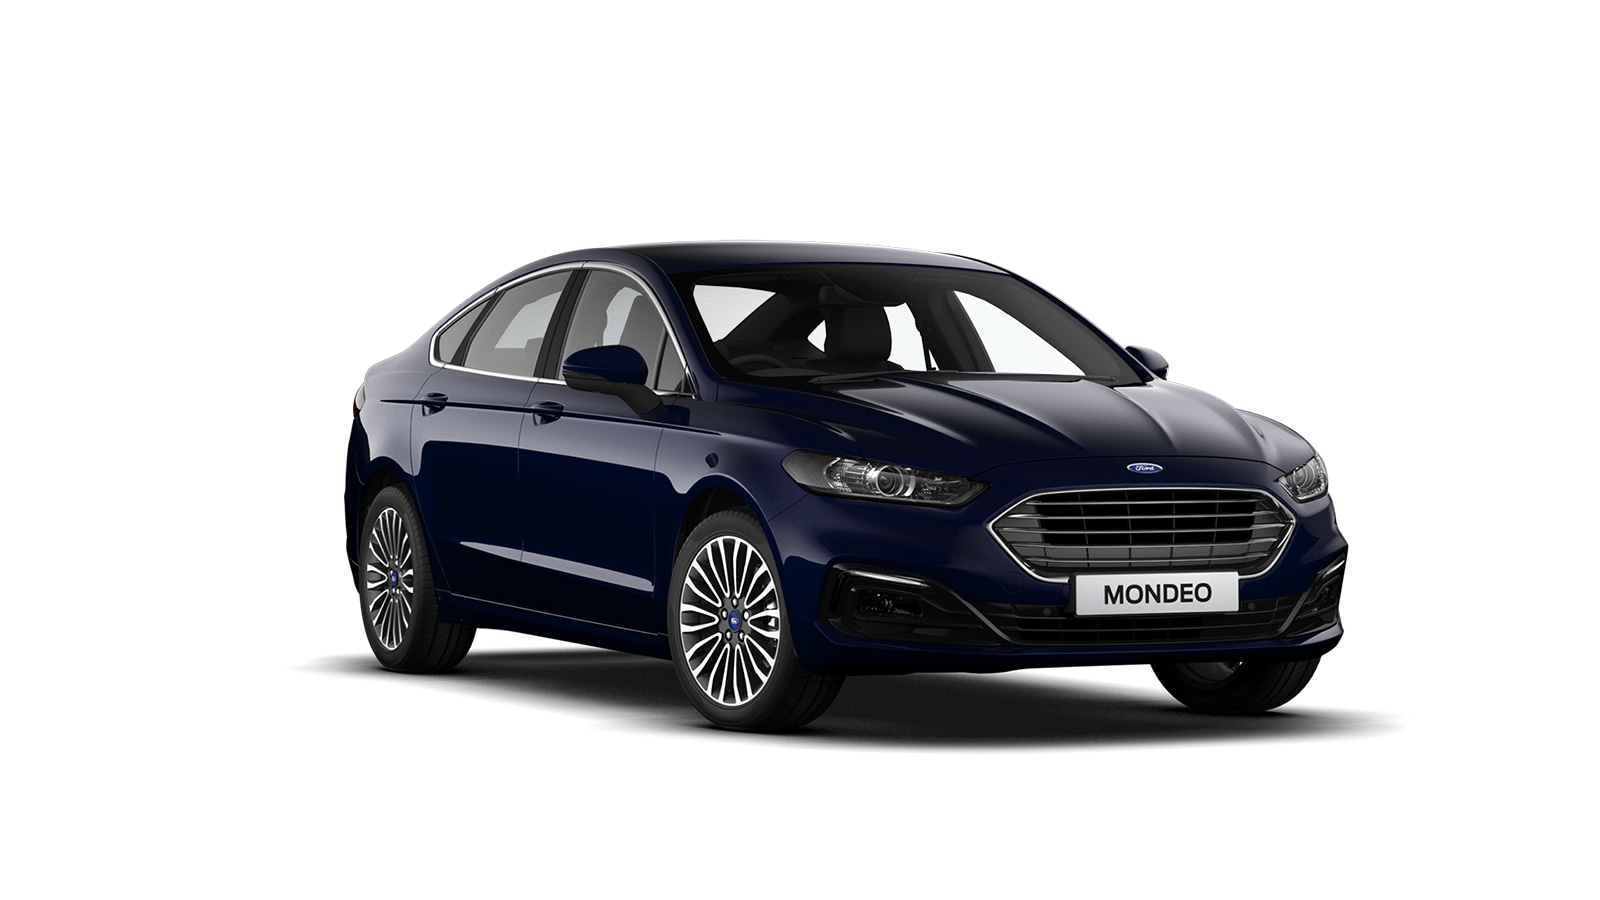 The Ford Mondeo and Mondeo Hybrid